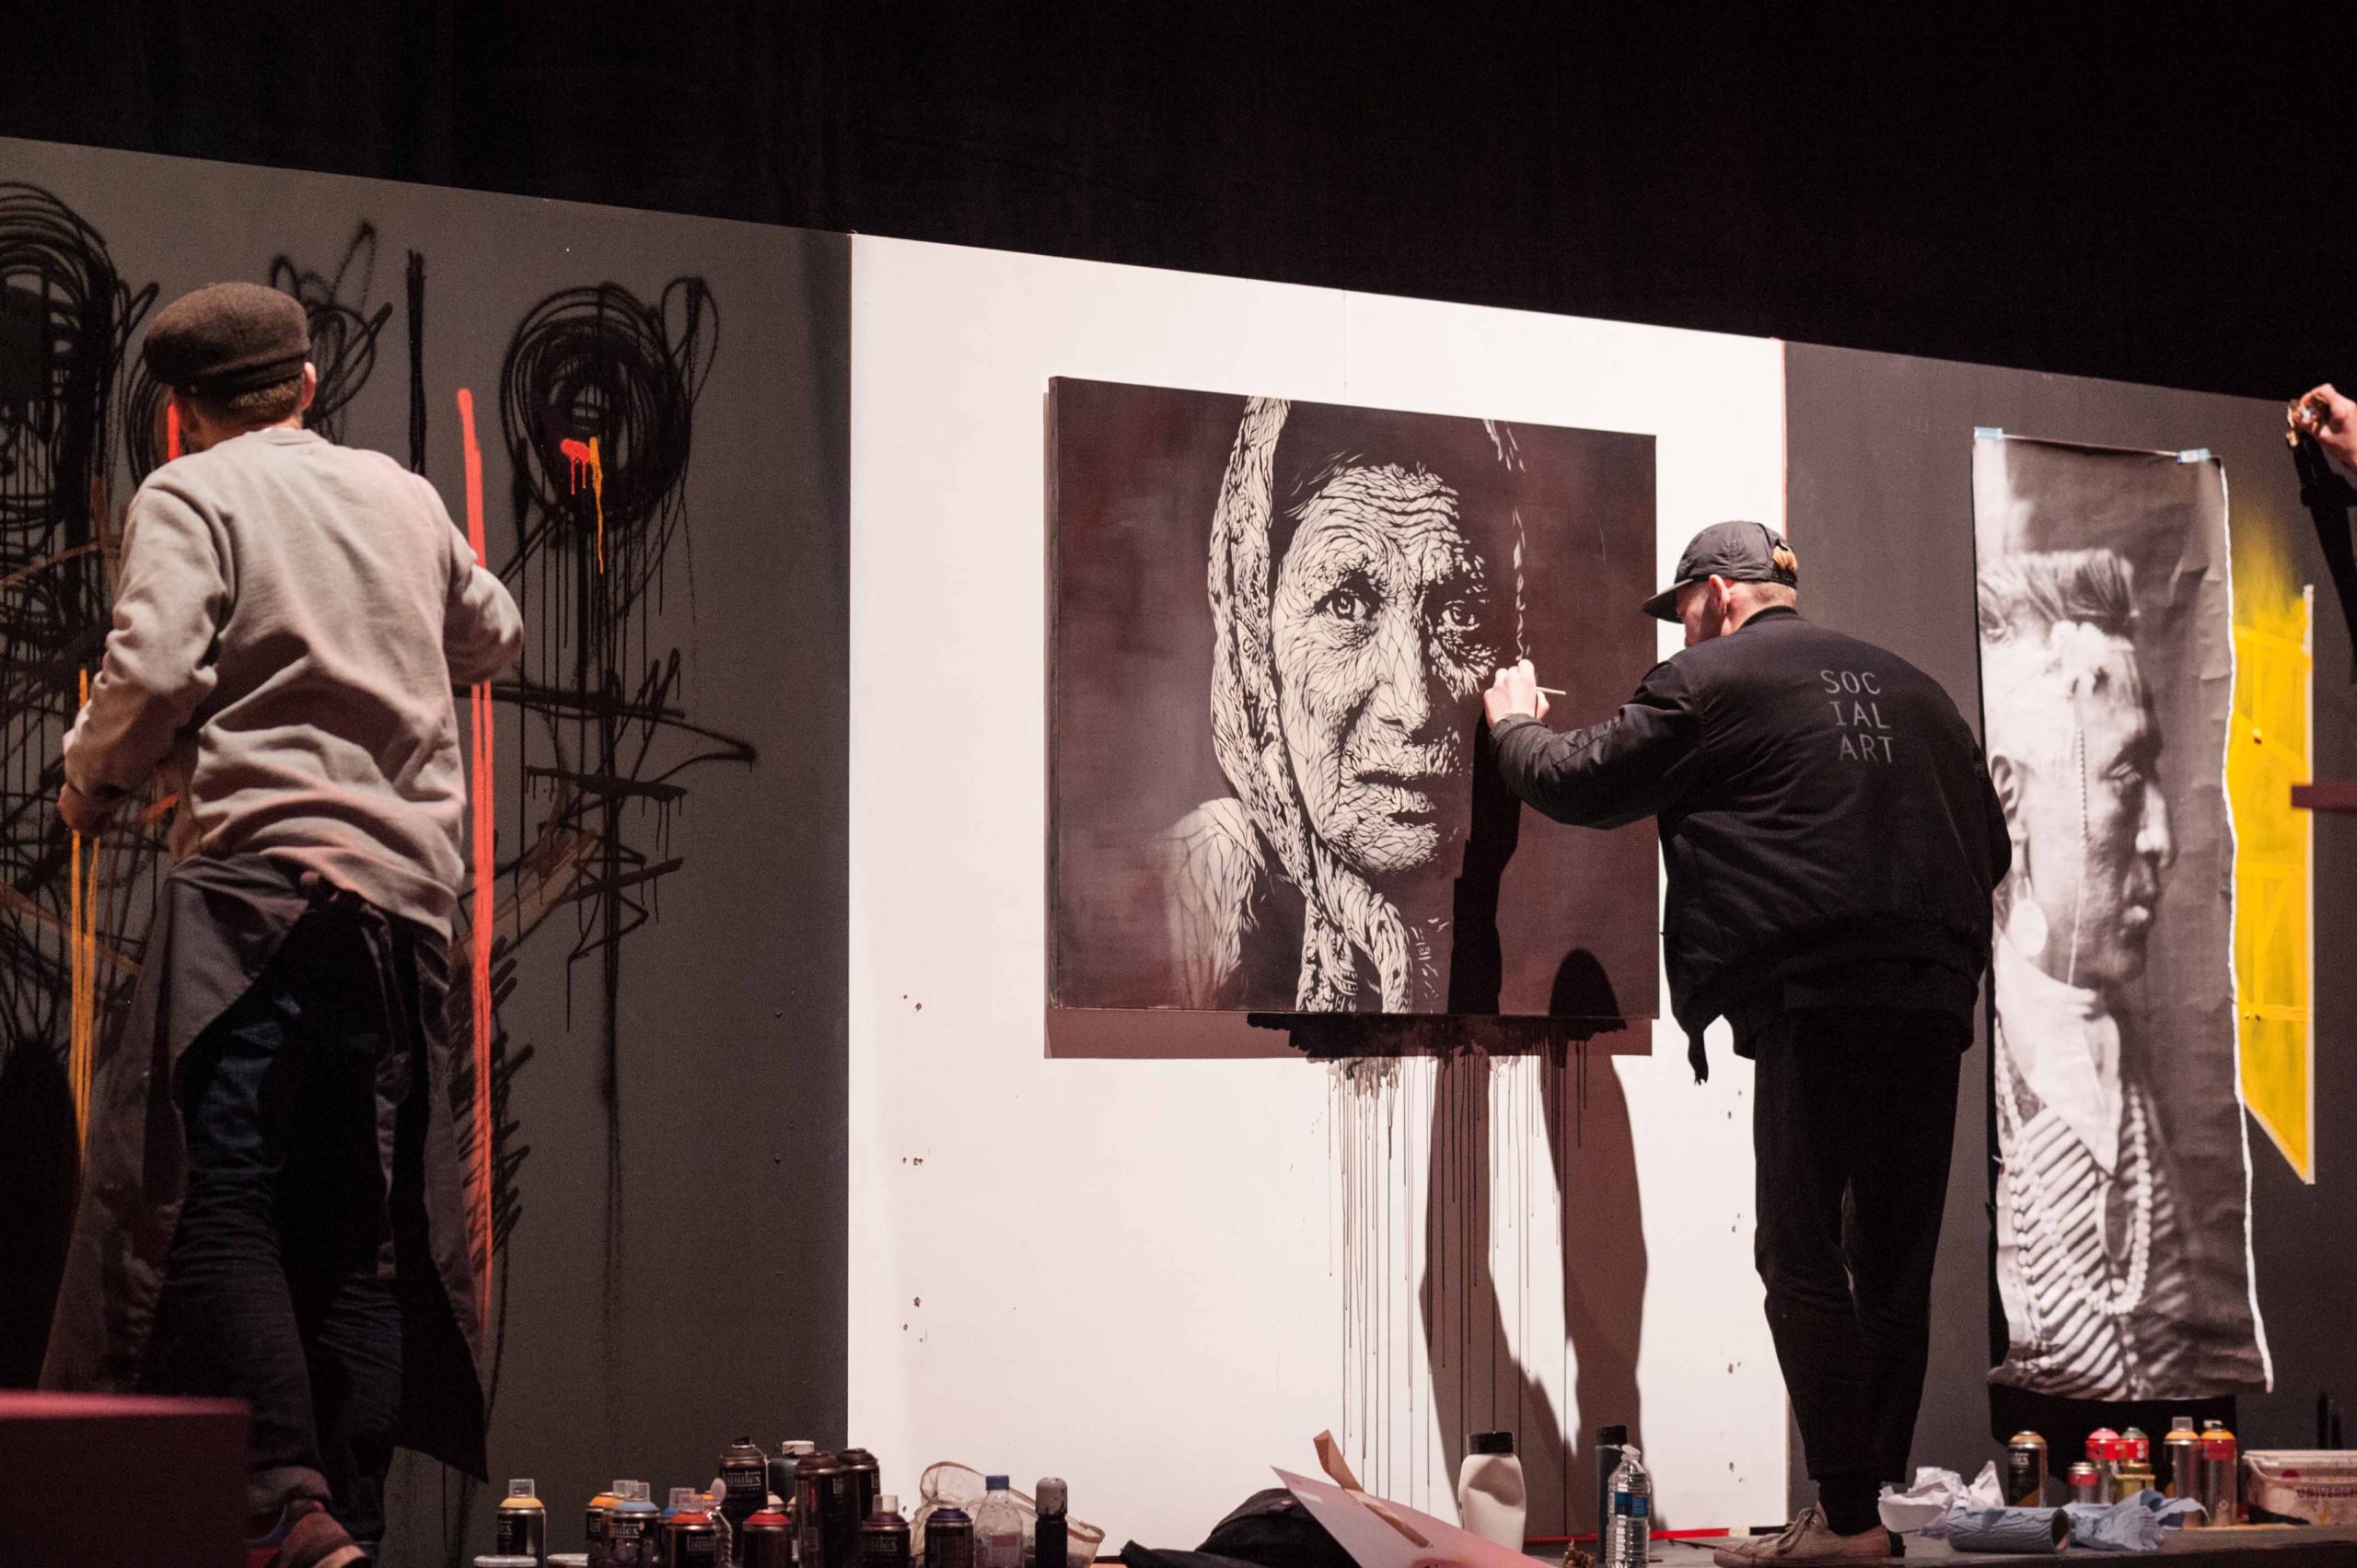 Live painting by NASTI during the 2017 Kick Off